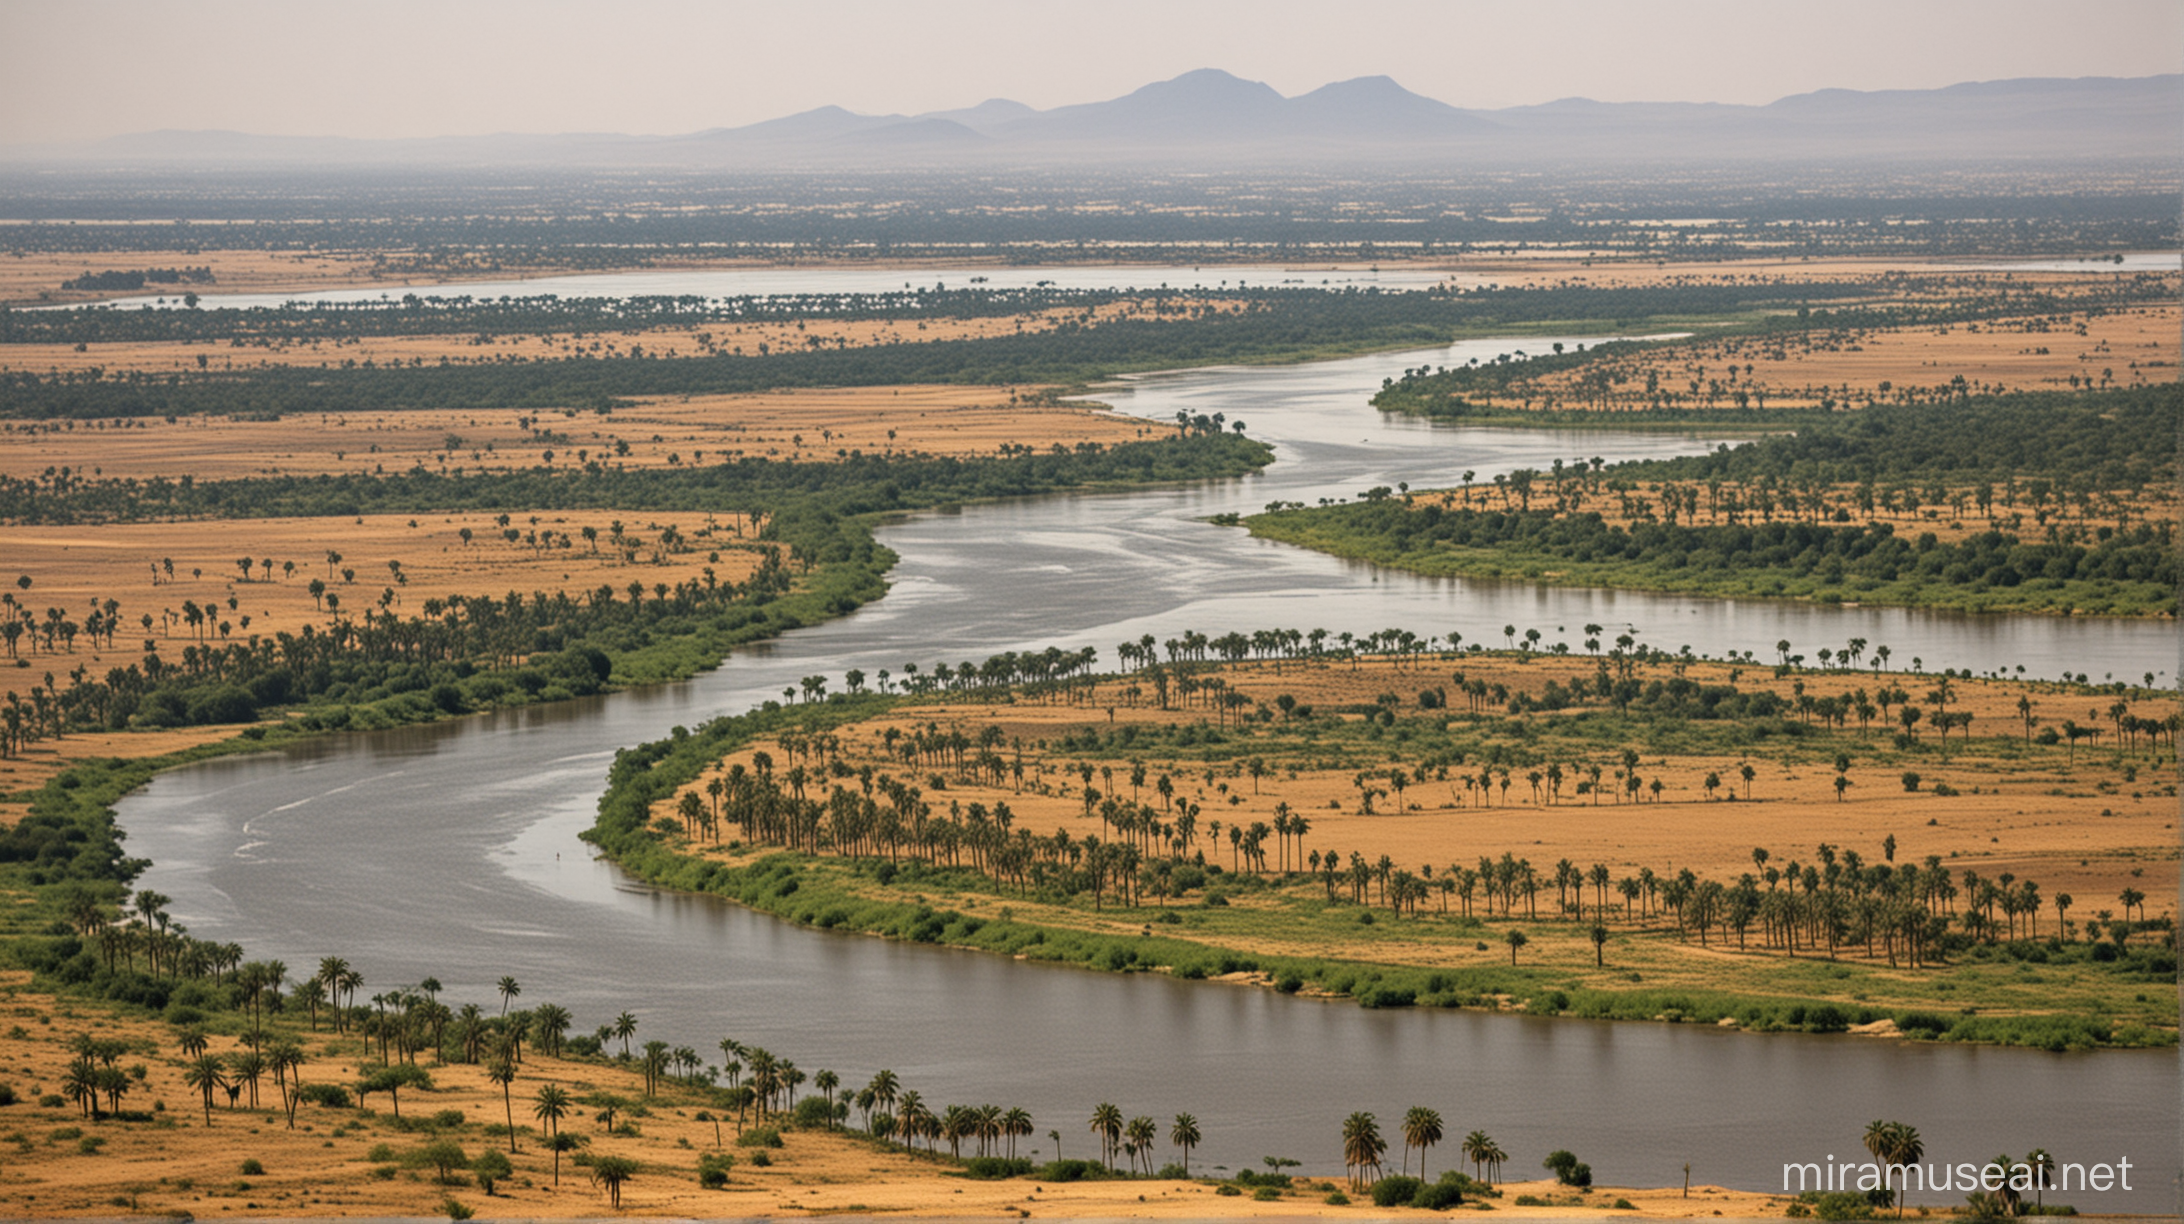 Scenic Views of the Majestic Nile River in Africa